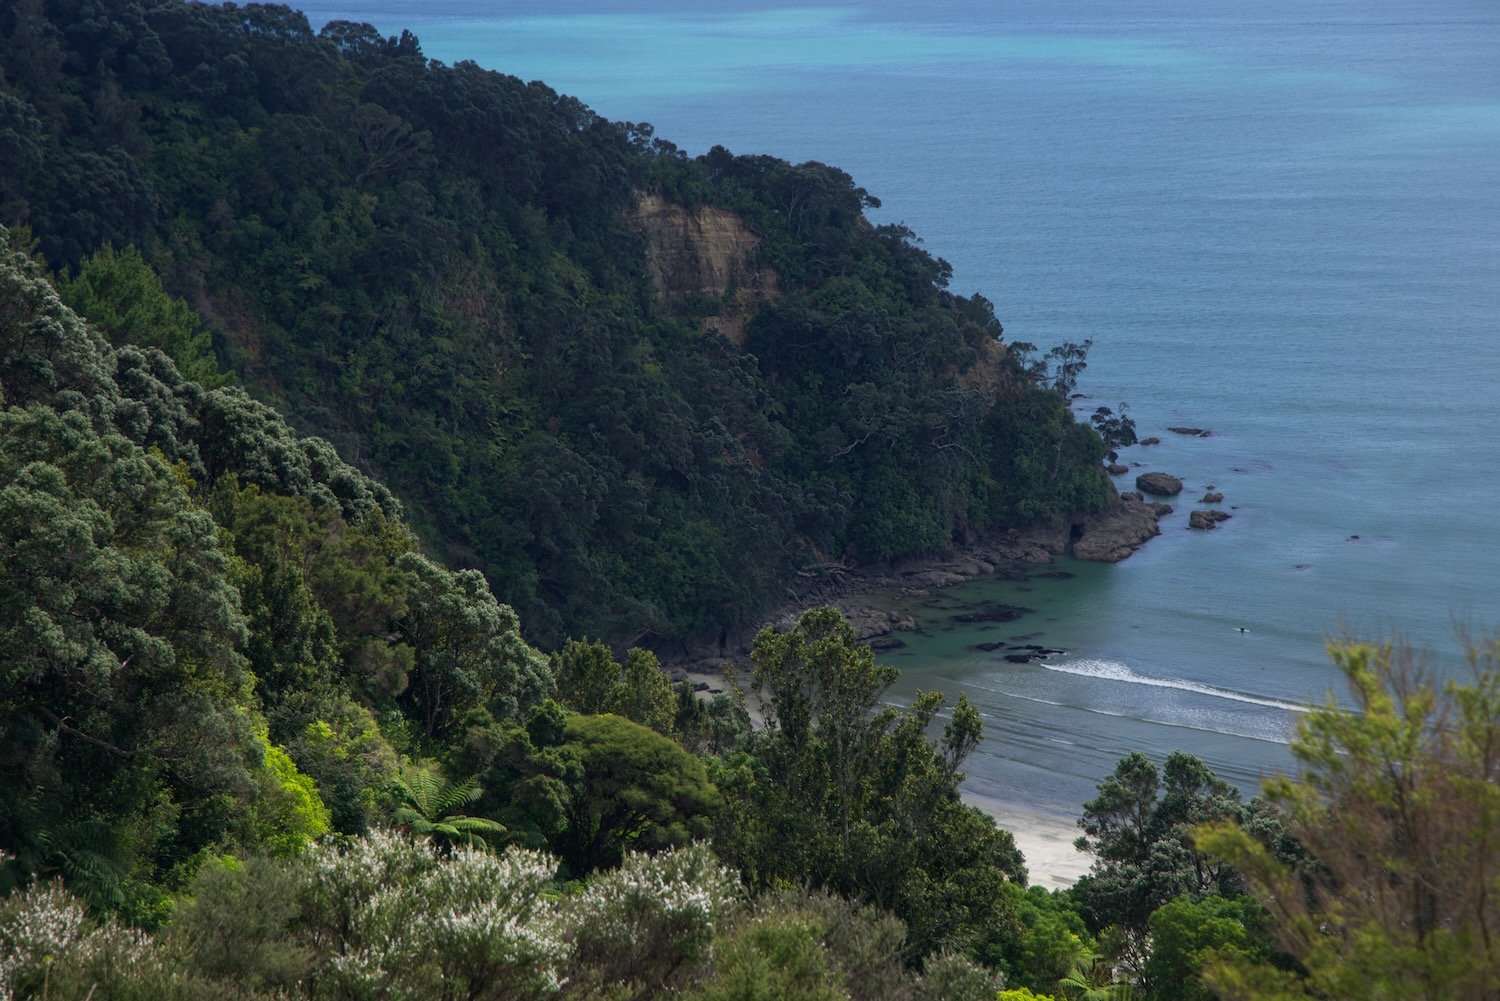 Cove by Whakatāne with surfer